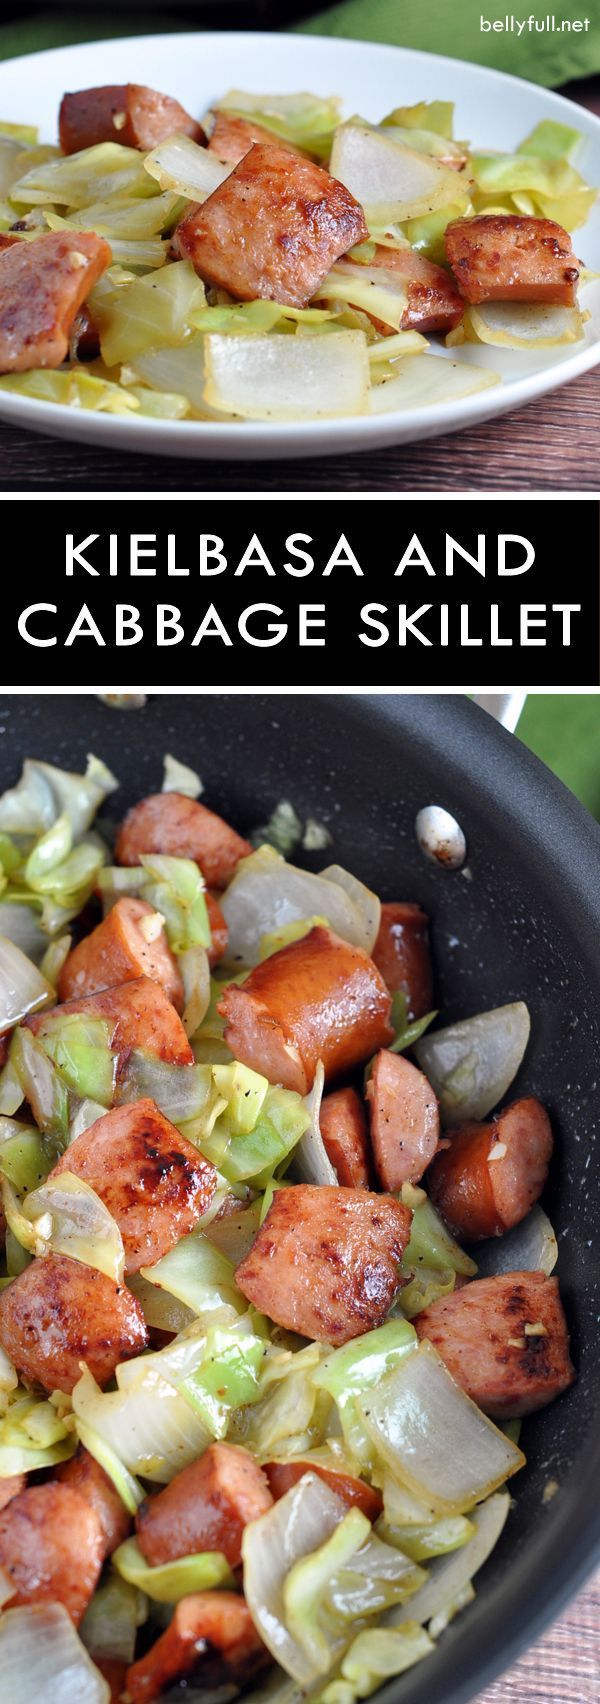 Kielbasa and Cabbage Skillet – This fast one-pan skillet dish is filling, full of flavor, and so easy for any weeknight dinner!